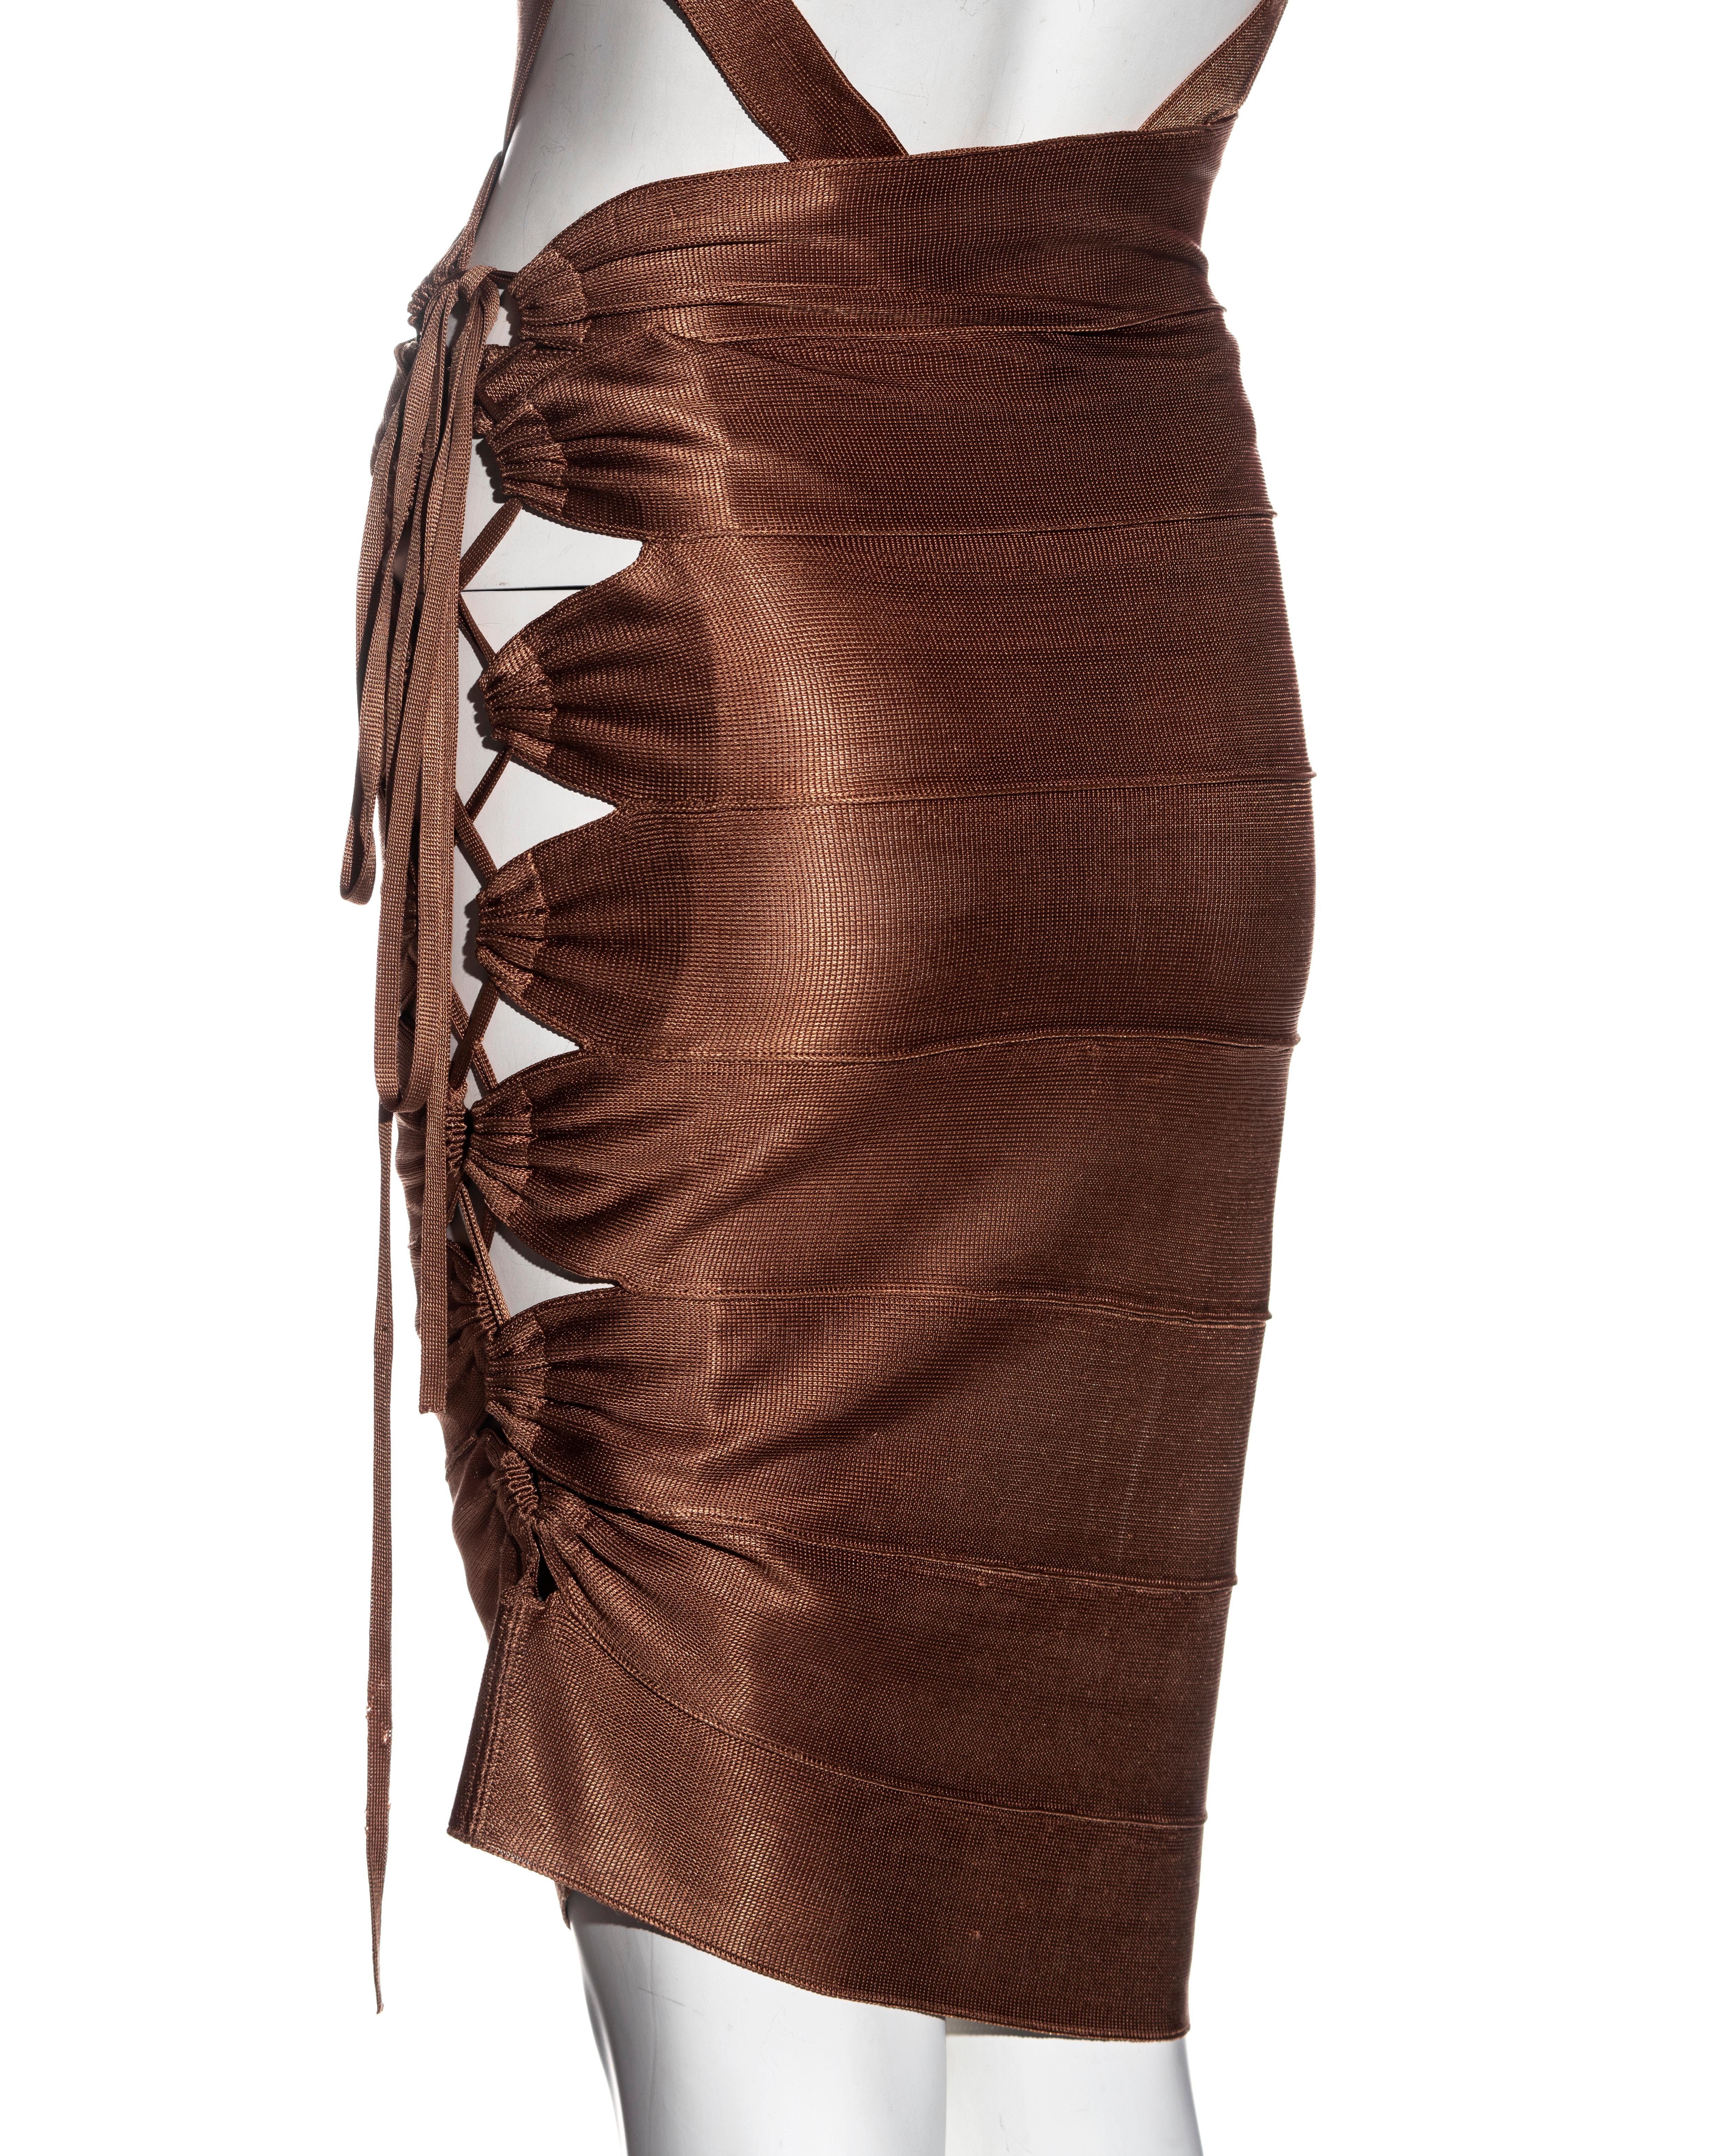 Azzedine Alaia bronze acetate knit bandage skirt and bodysuit set, ss 1986 For Sale 2